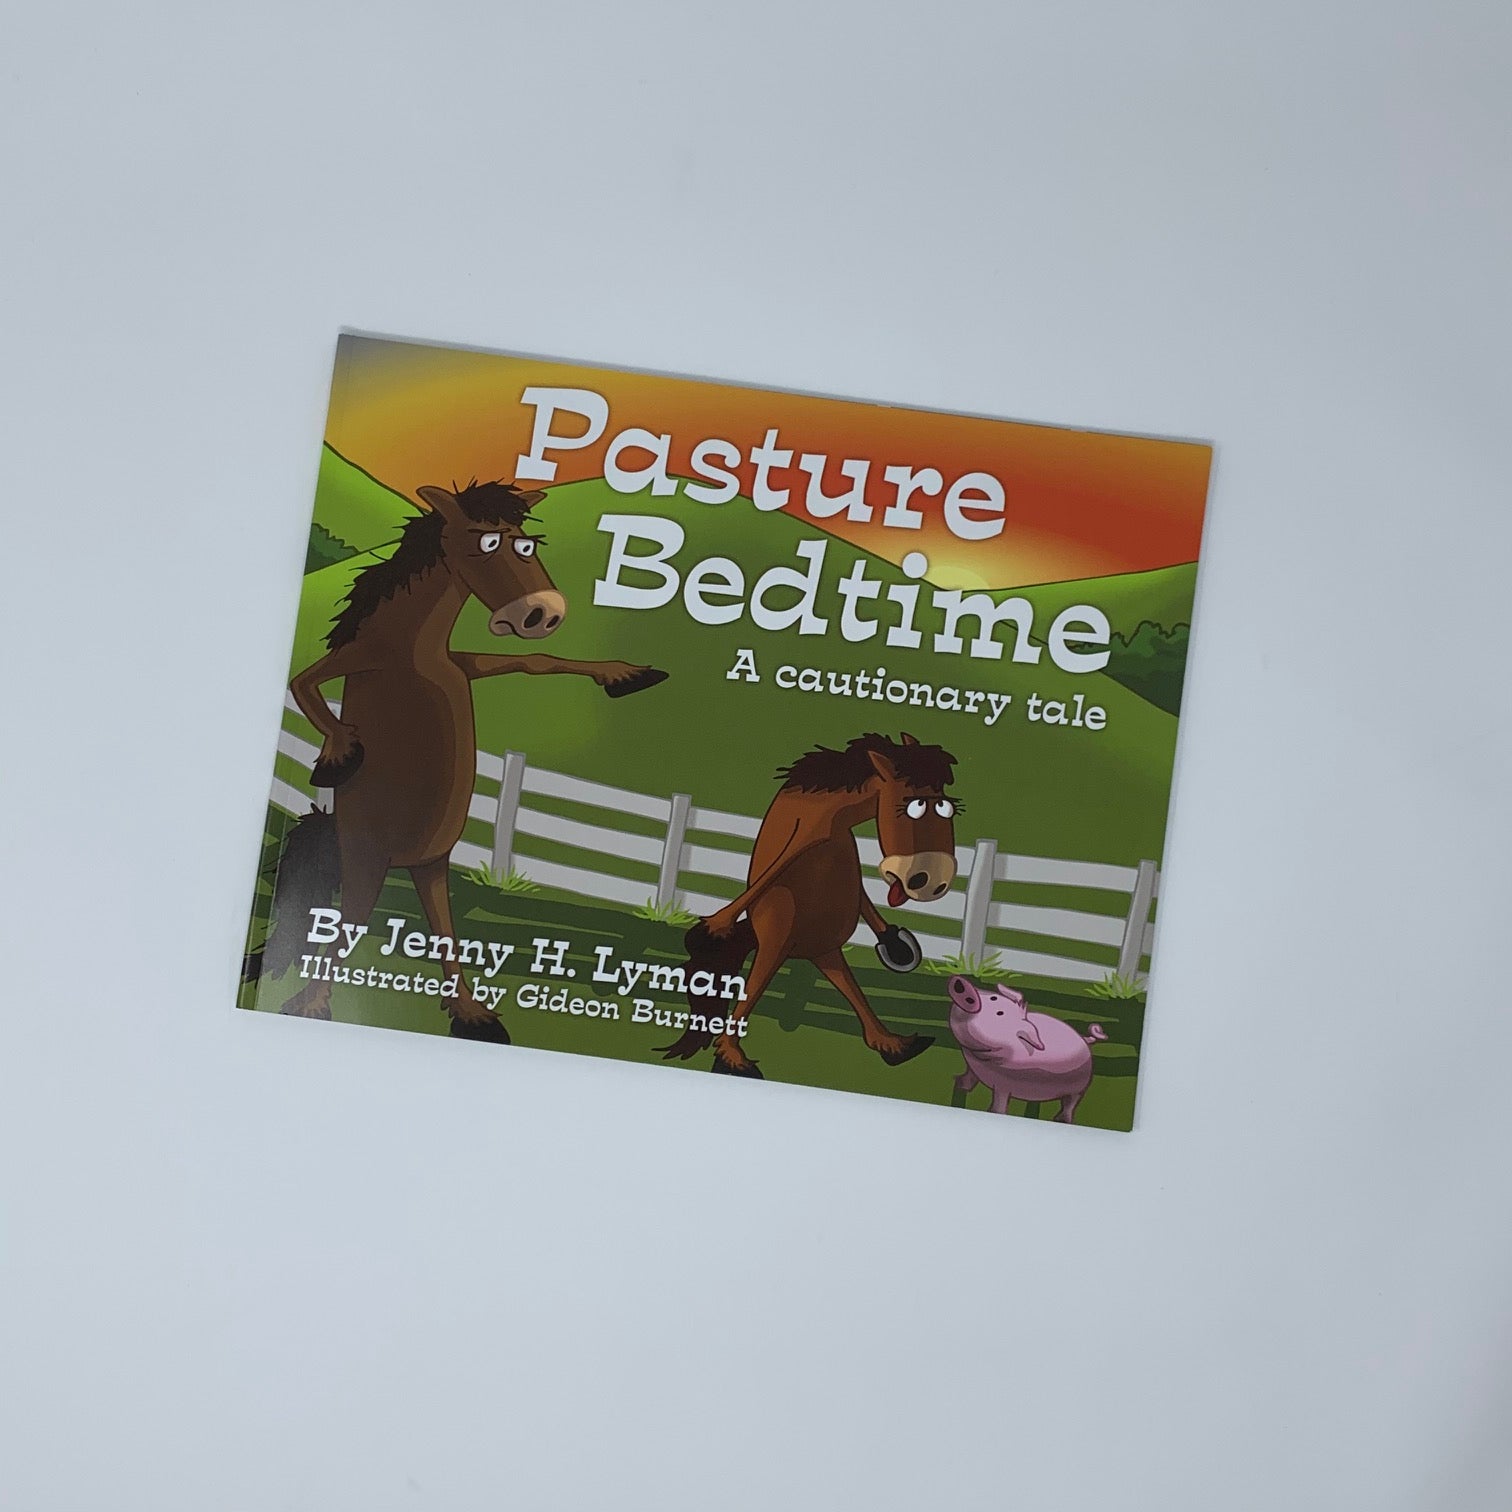 Pasture Bedtime A Cautionary Tale Children's Book Cover Illustration of Horse Pointing to Pasture Younger Horse Looking Exhausted Small Pig Looking Up at Them